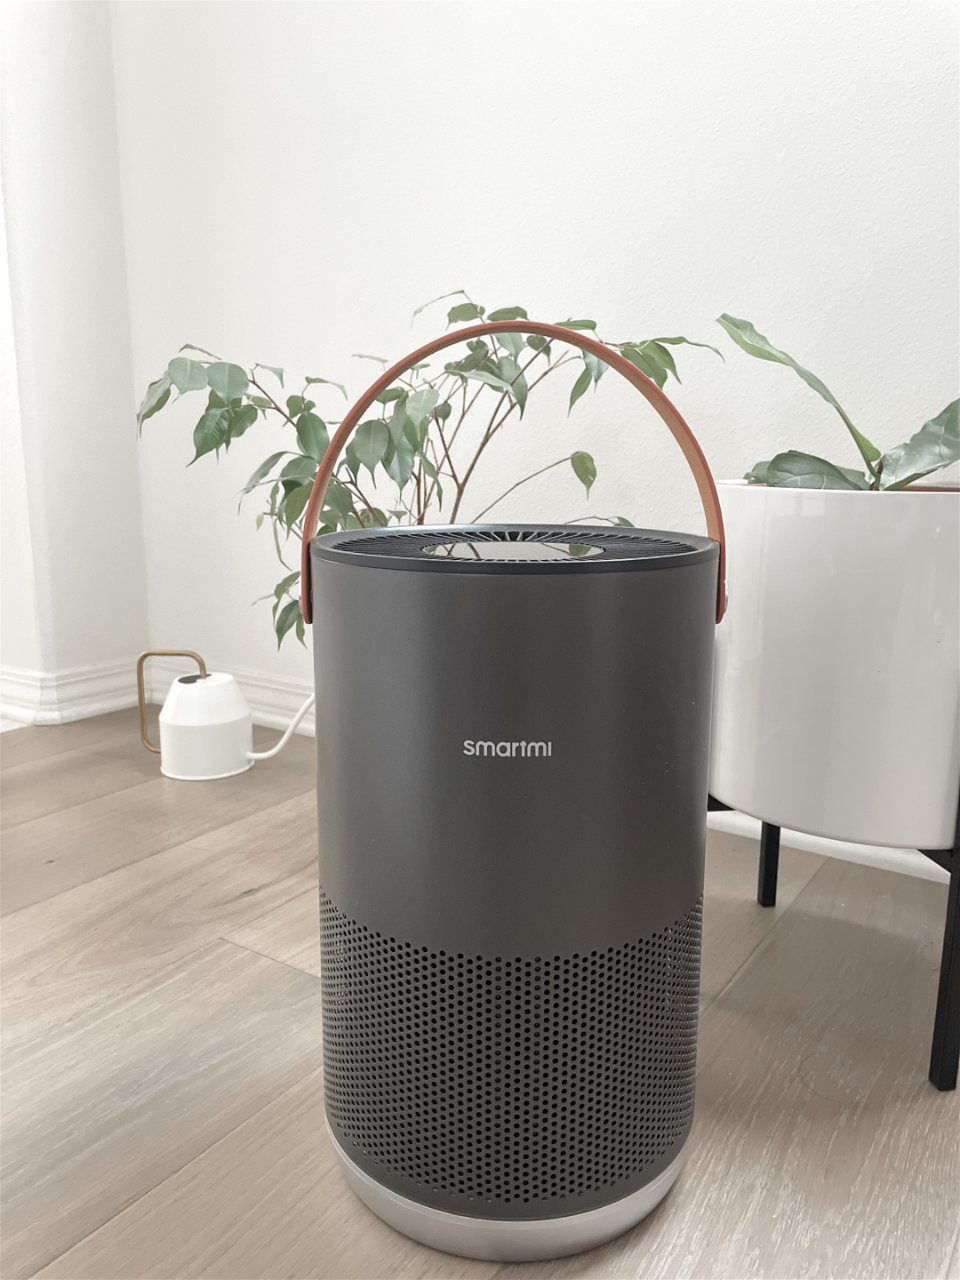 smartmi 智米,smartmi Small Air Purifiers P1 with Handle for Home, Works with HomeKit Alexa, Portable HEPA H13 Air Purifier for Bedroom Small Room, Remove Odor Pet Smoke Dust Pollen PM2.5, Quiet, Dual Sensor: Kitchen & Dining